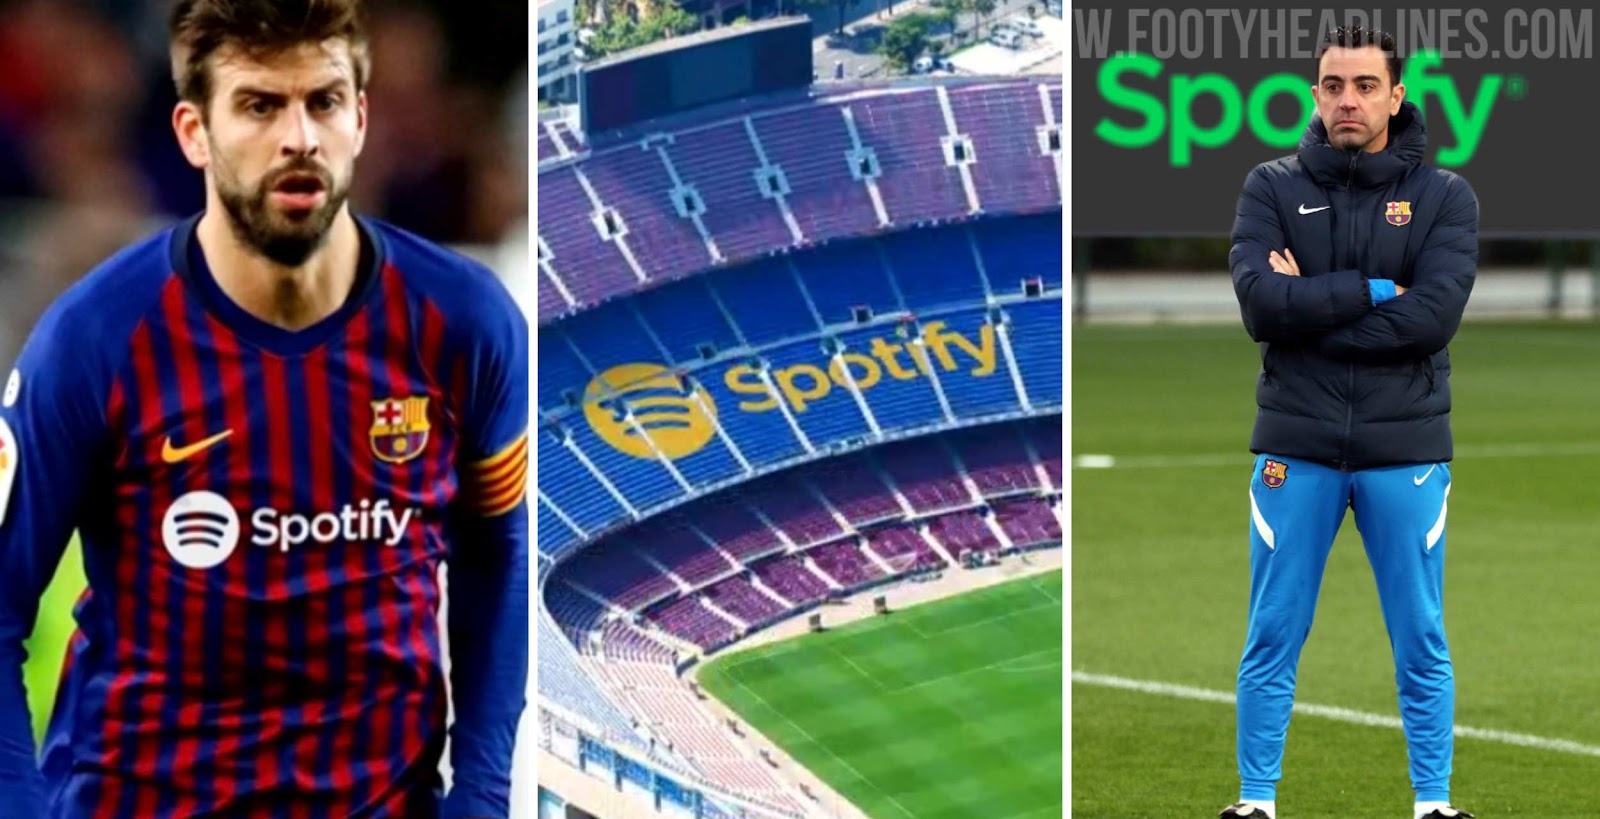 Barcelona Reveal Look of Spotify on Kit - No Changing Logos? + Members Approve Deal - Footy Headlines